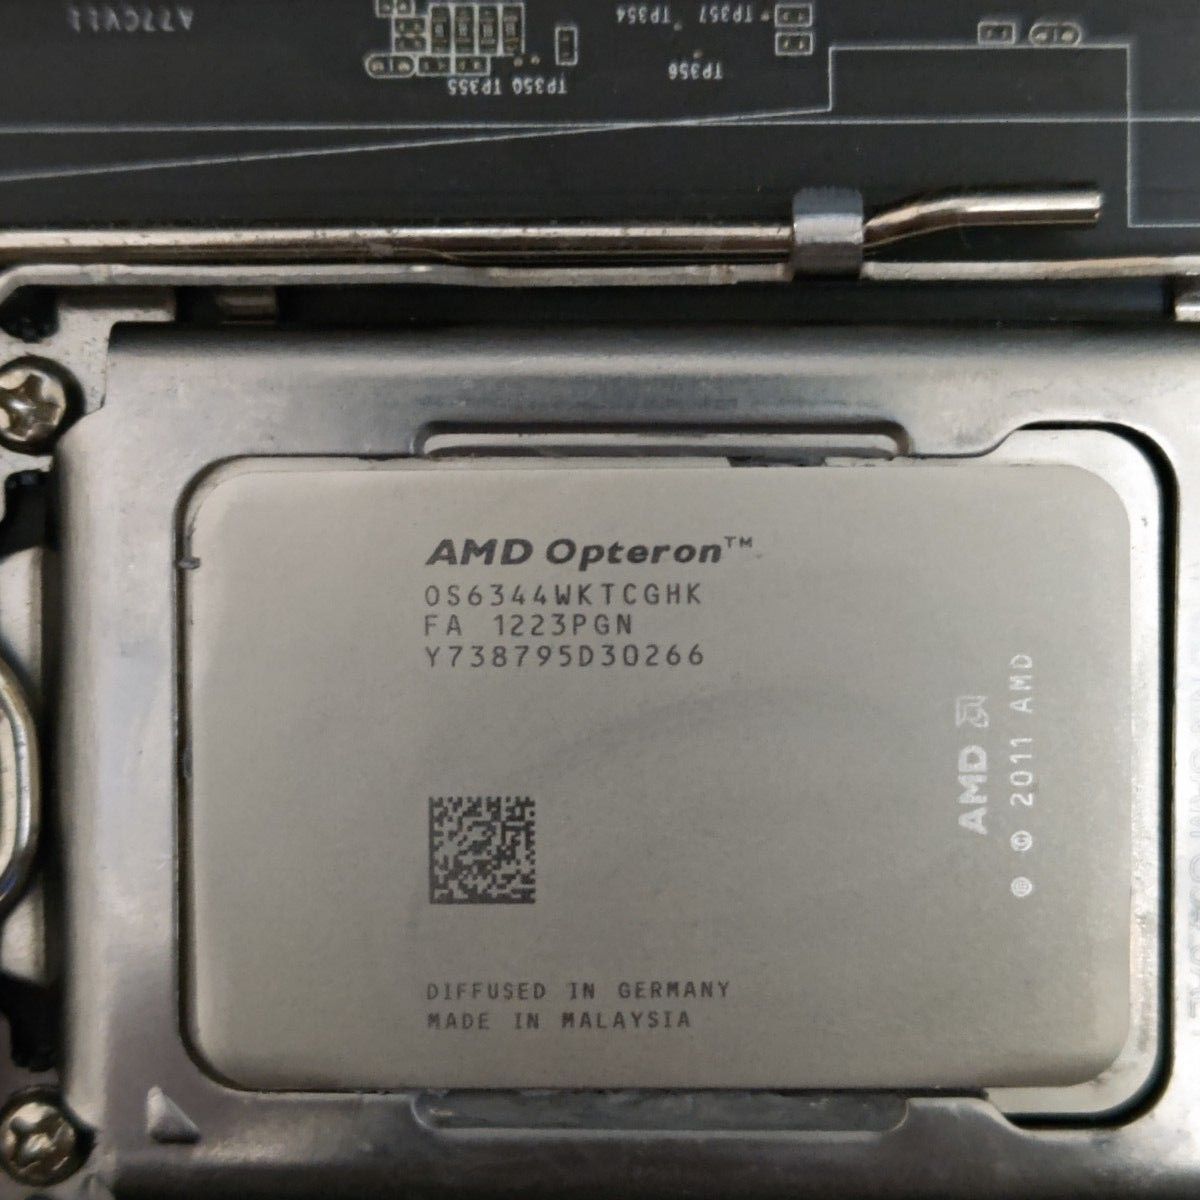 opteron　マザーボード　セット